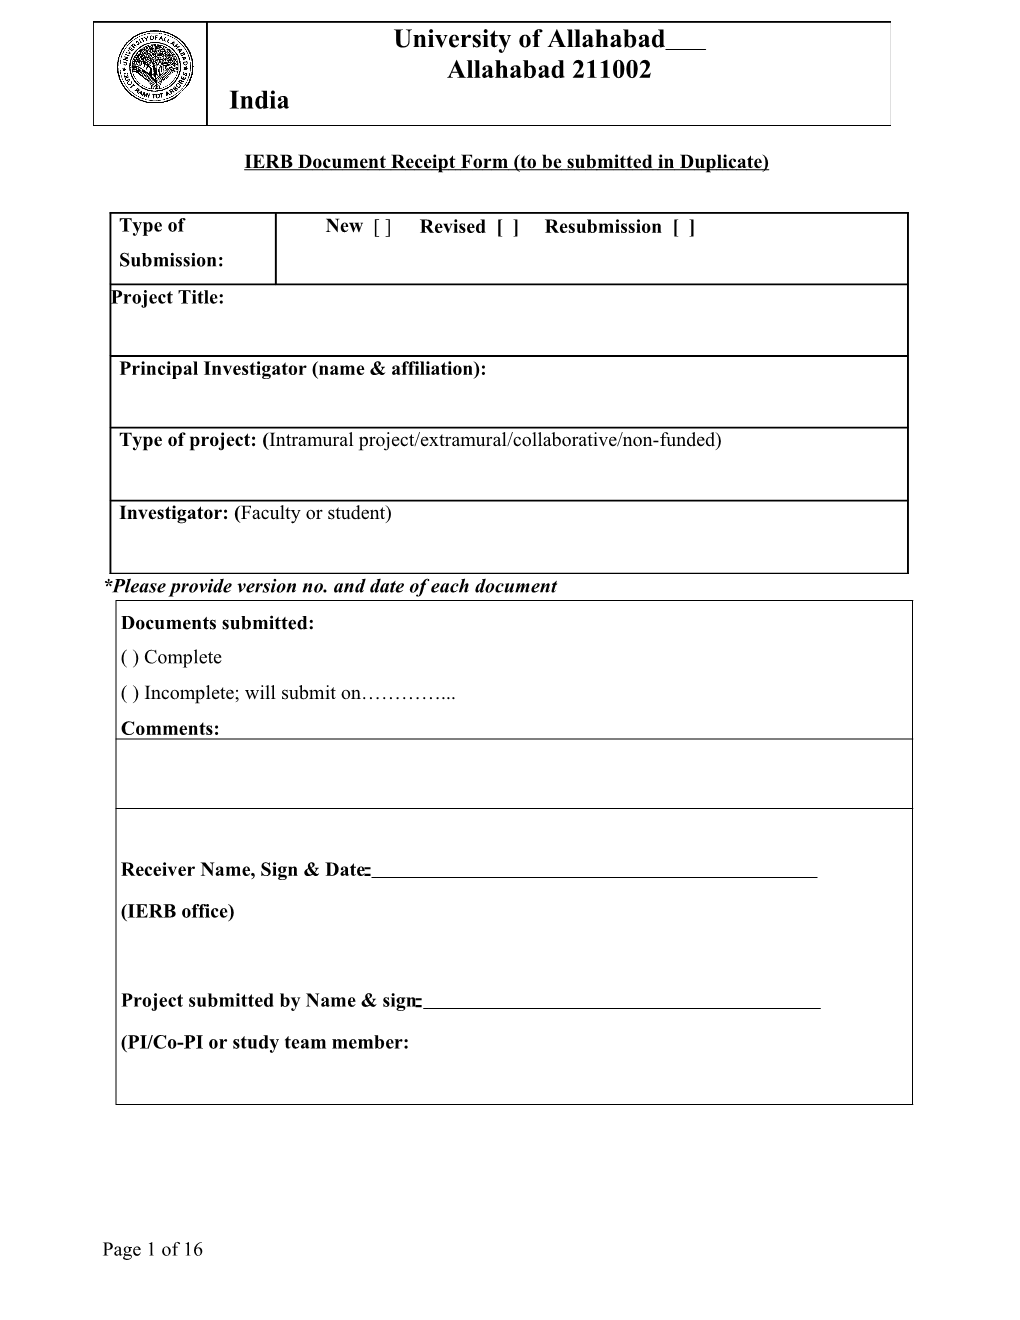 IERB Document Receipt Form (To Be Submitted in Duplicate)